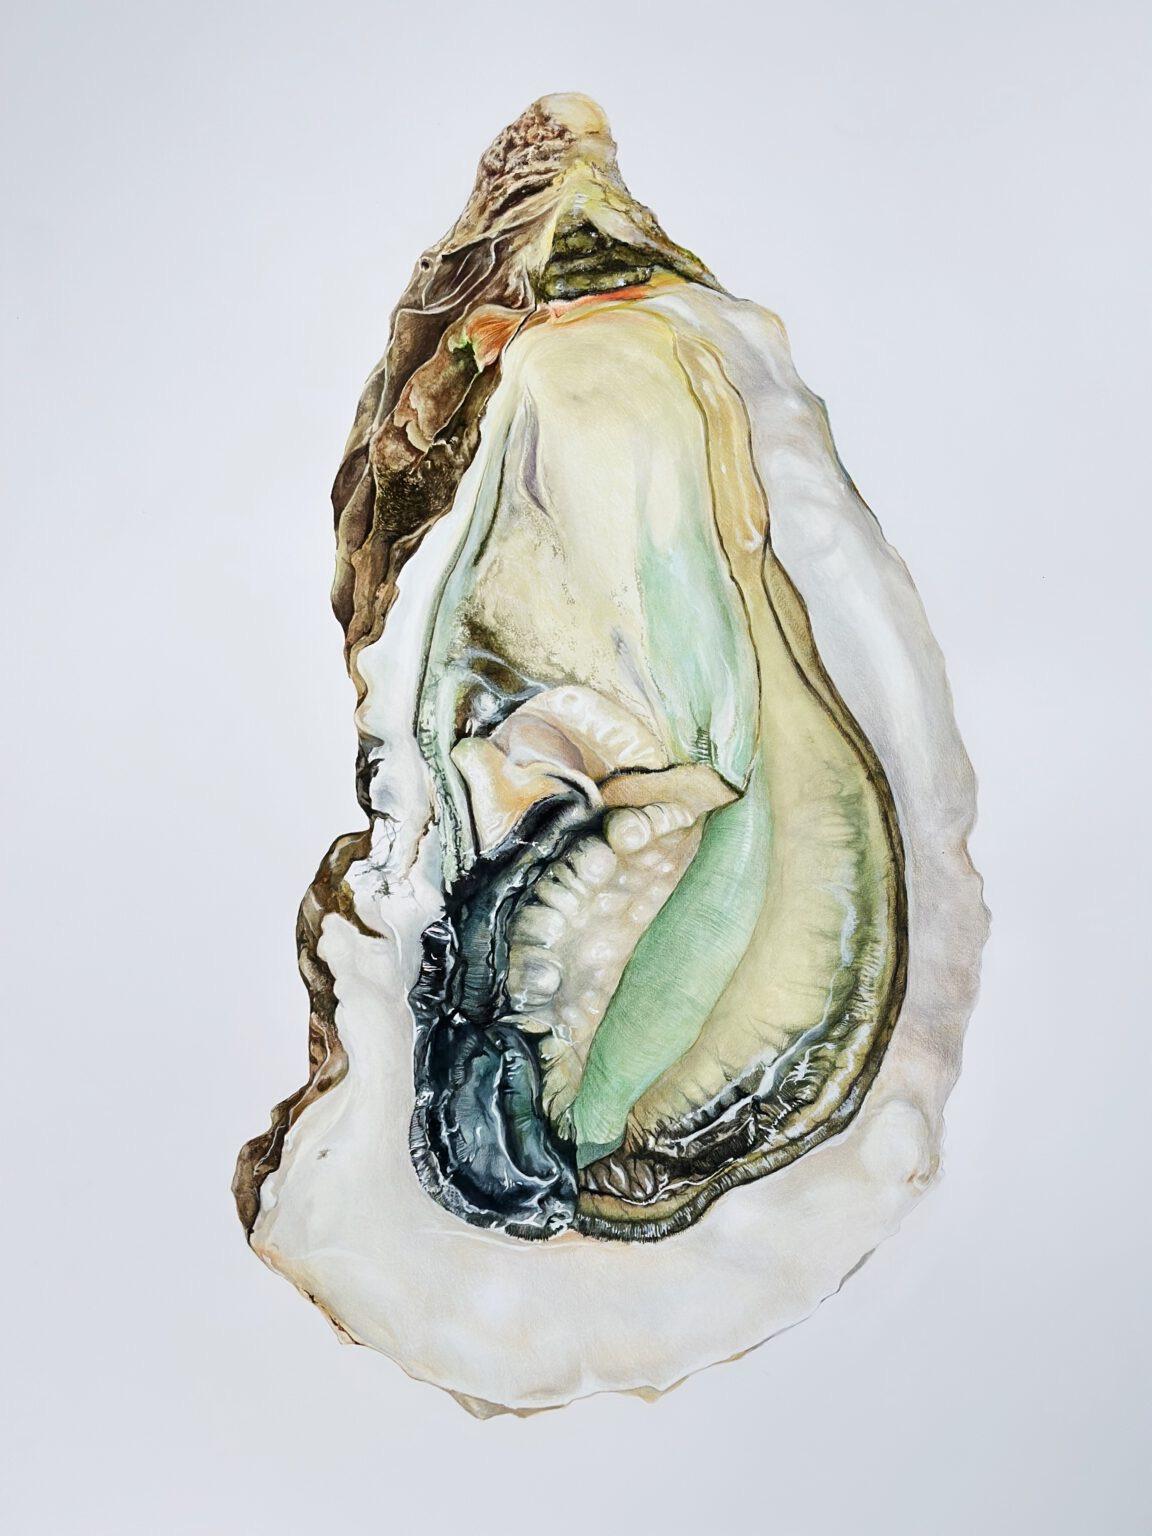 sexual desire (oyster), pencil, watercolor, paper, 100x70cm - Art by Elena Brauschenberg